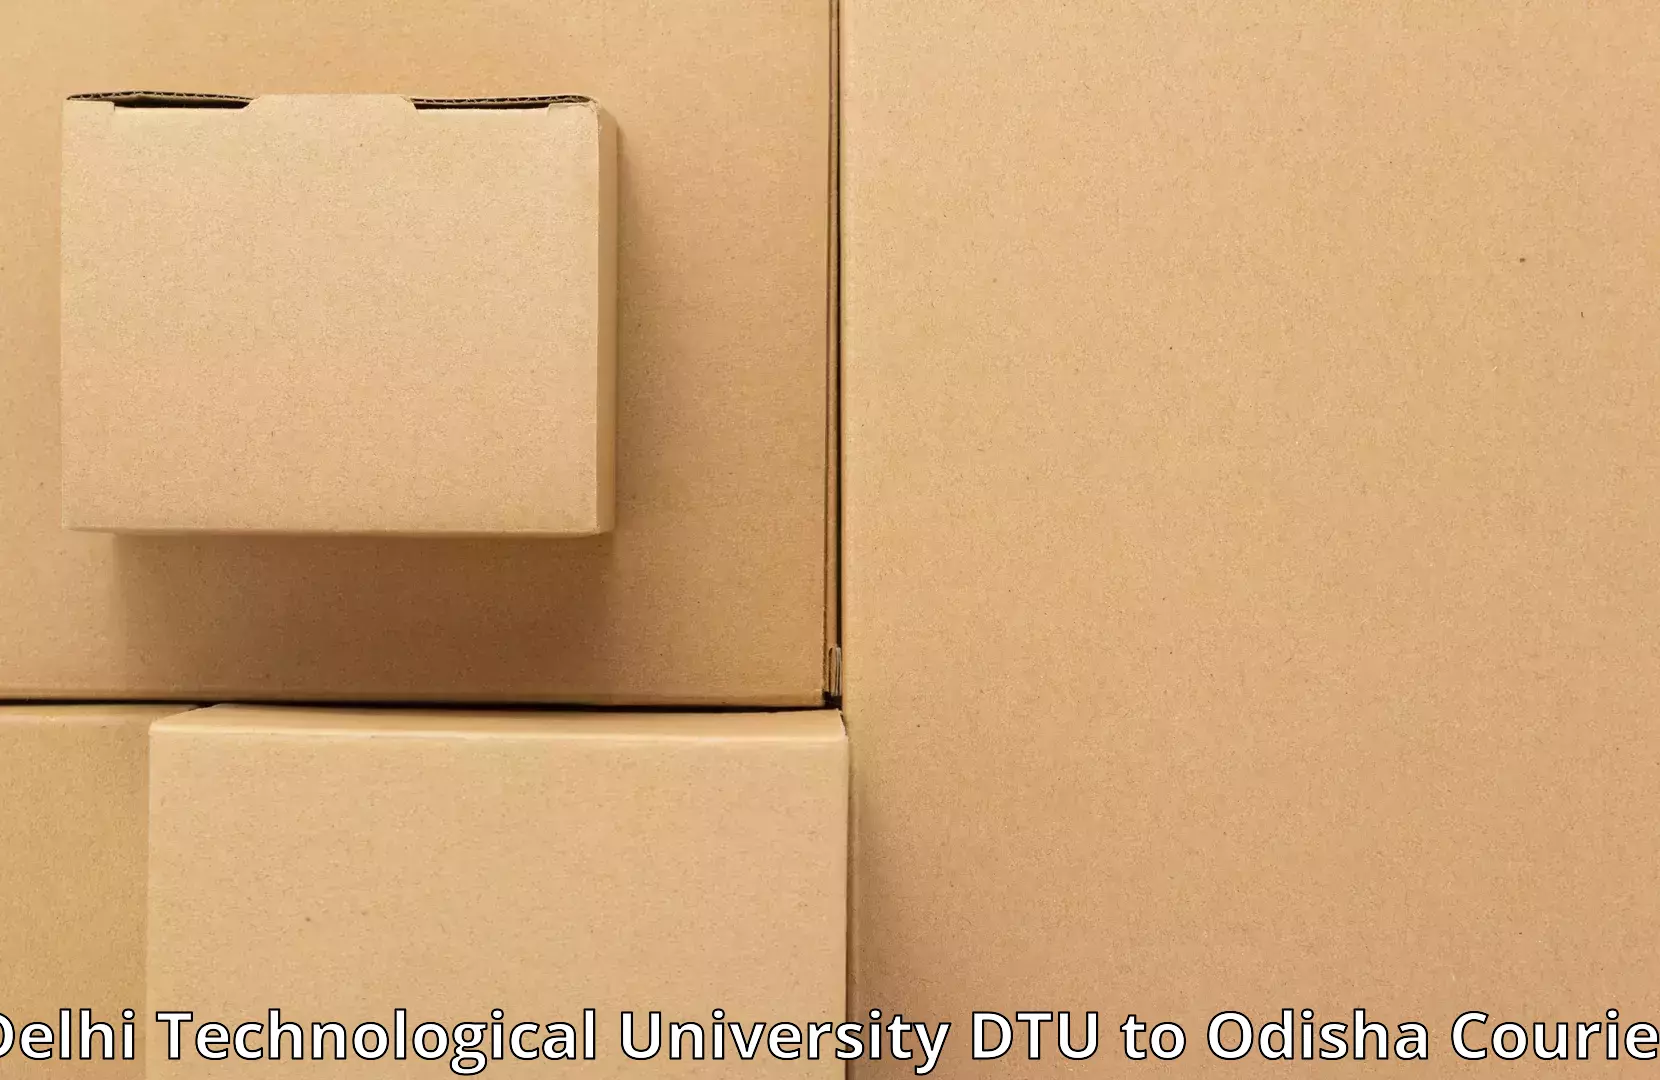 Residential moving services Delhi Technological University DTU to Odisha